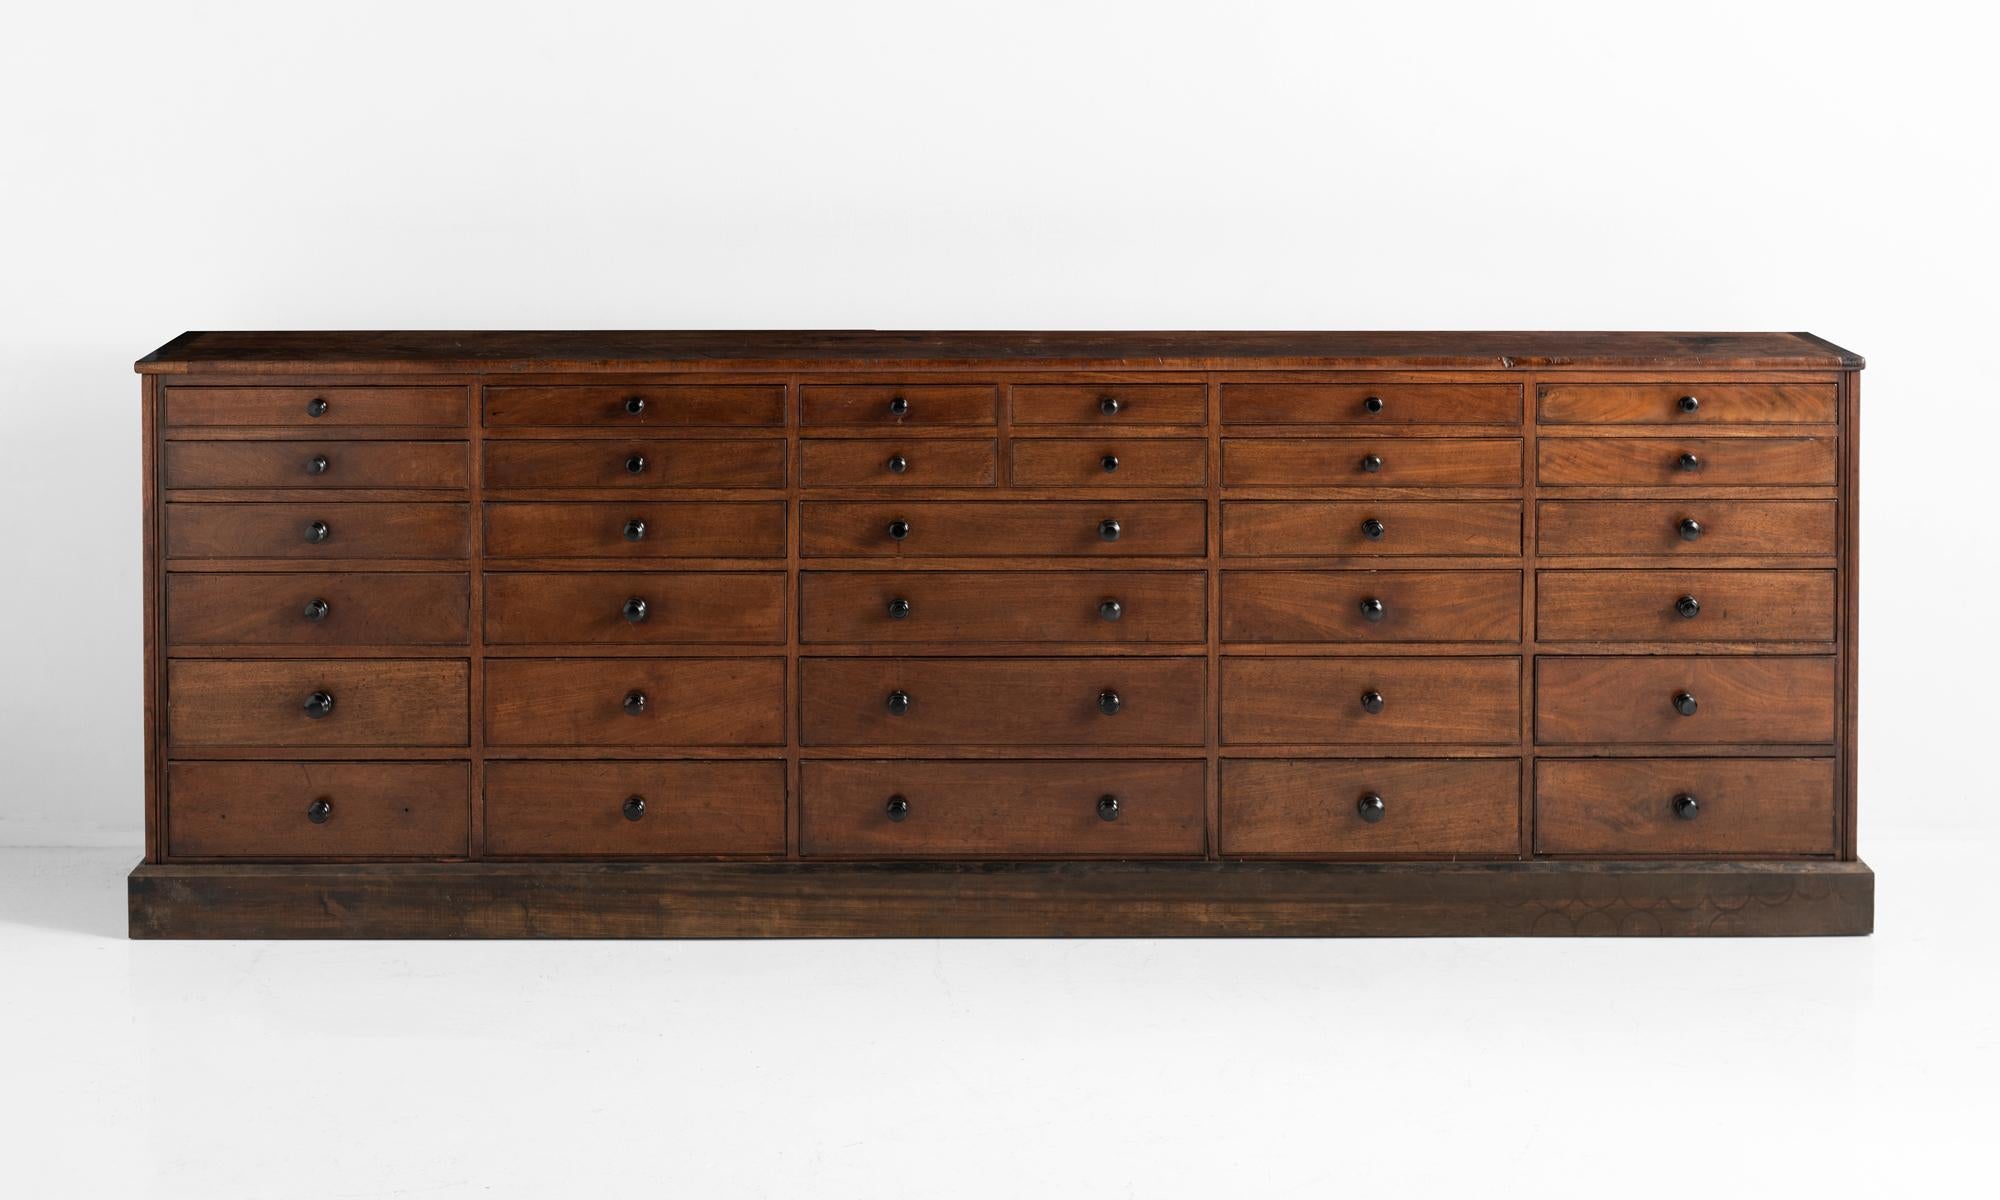 Mahogany drawers with ebonized turned handles. Originally from a cabinetmaker named “Boarders of Scotland” and dated 1843.